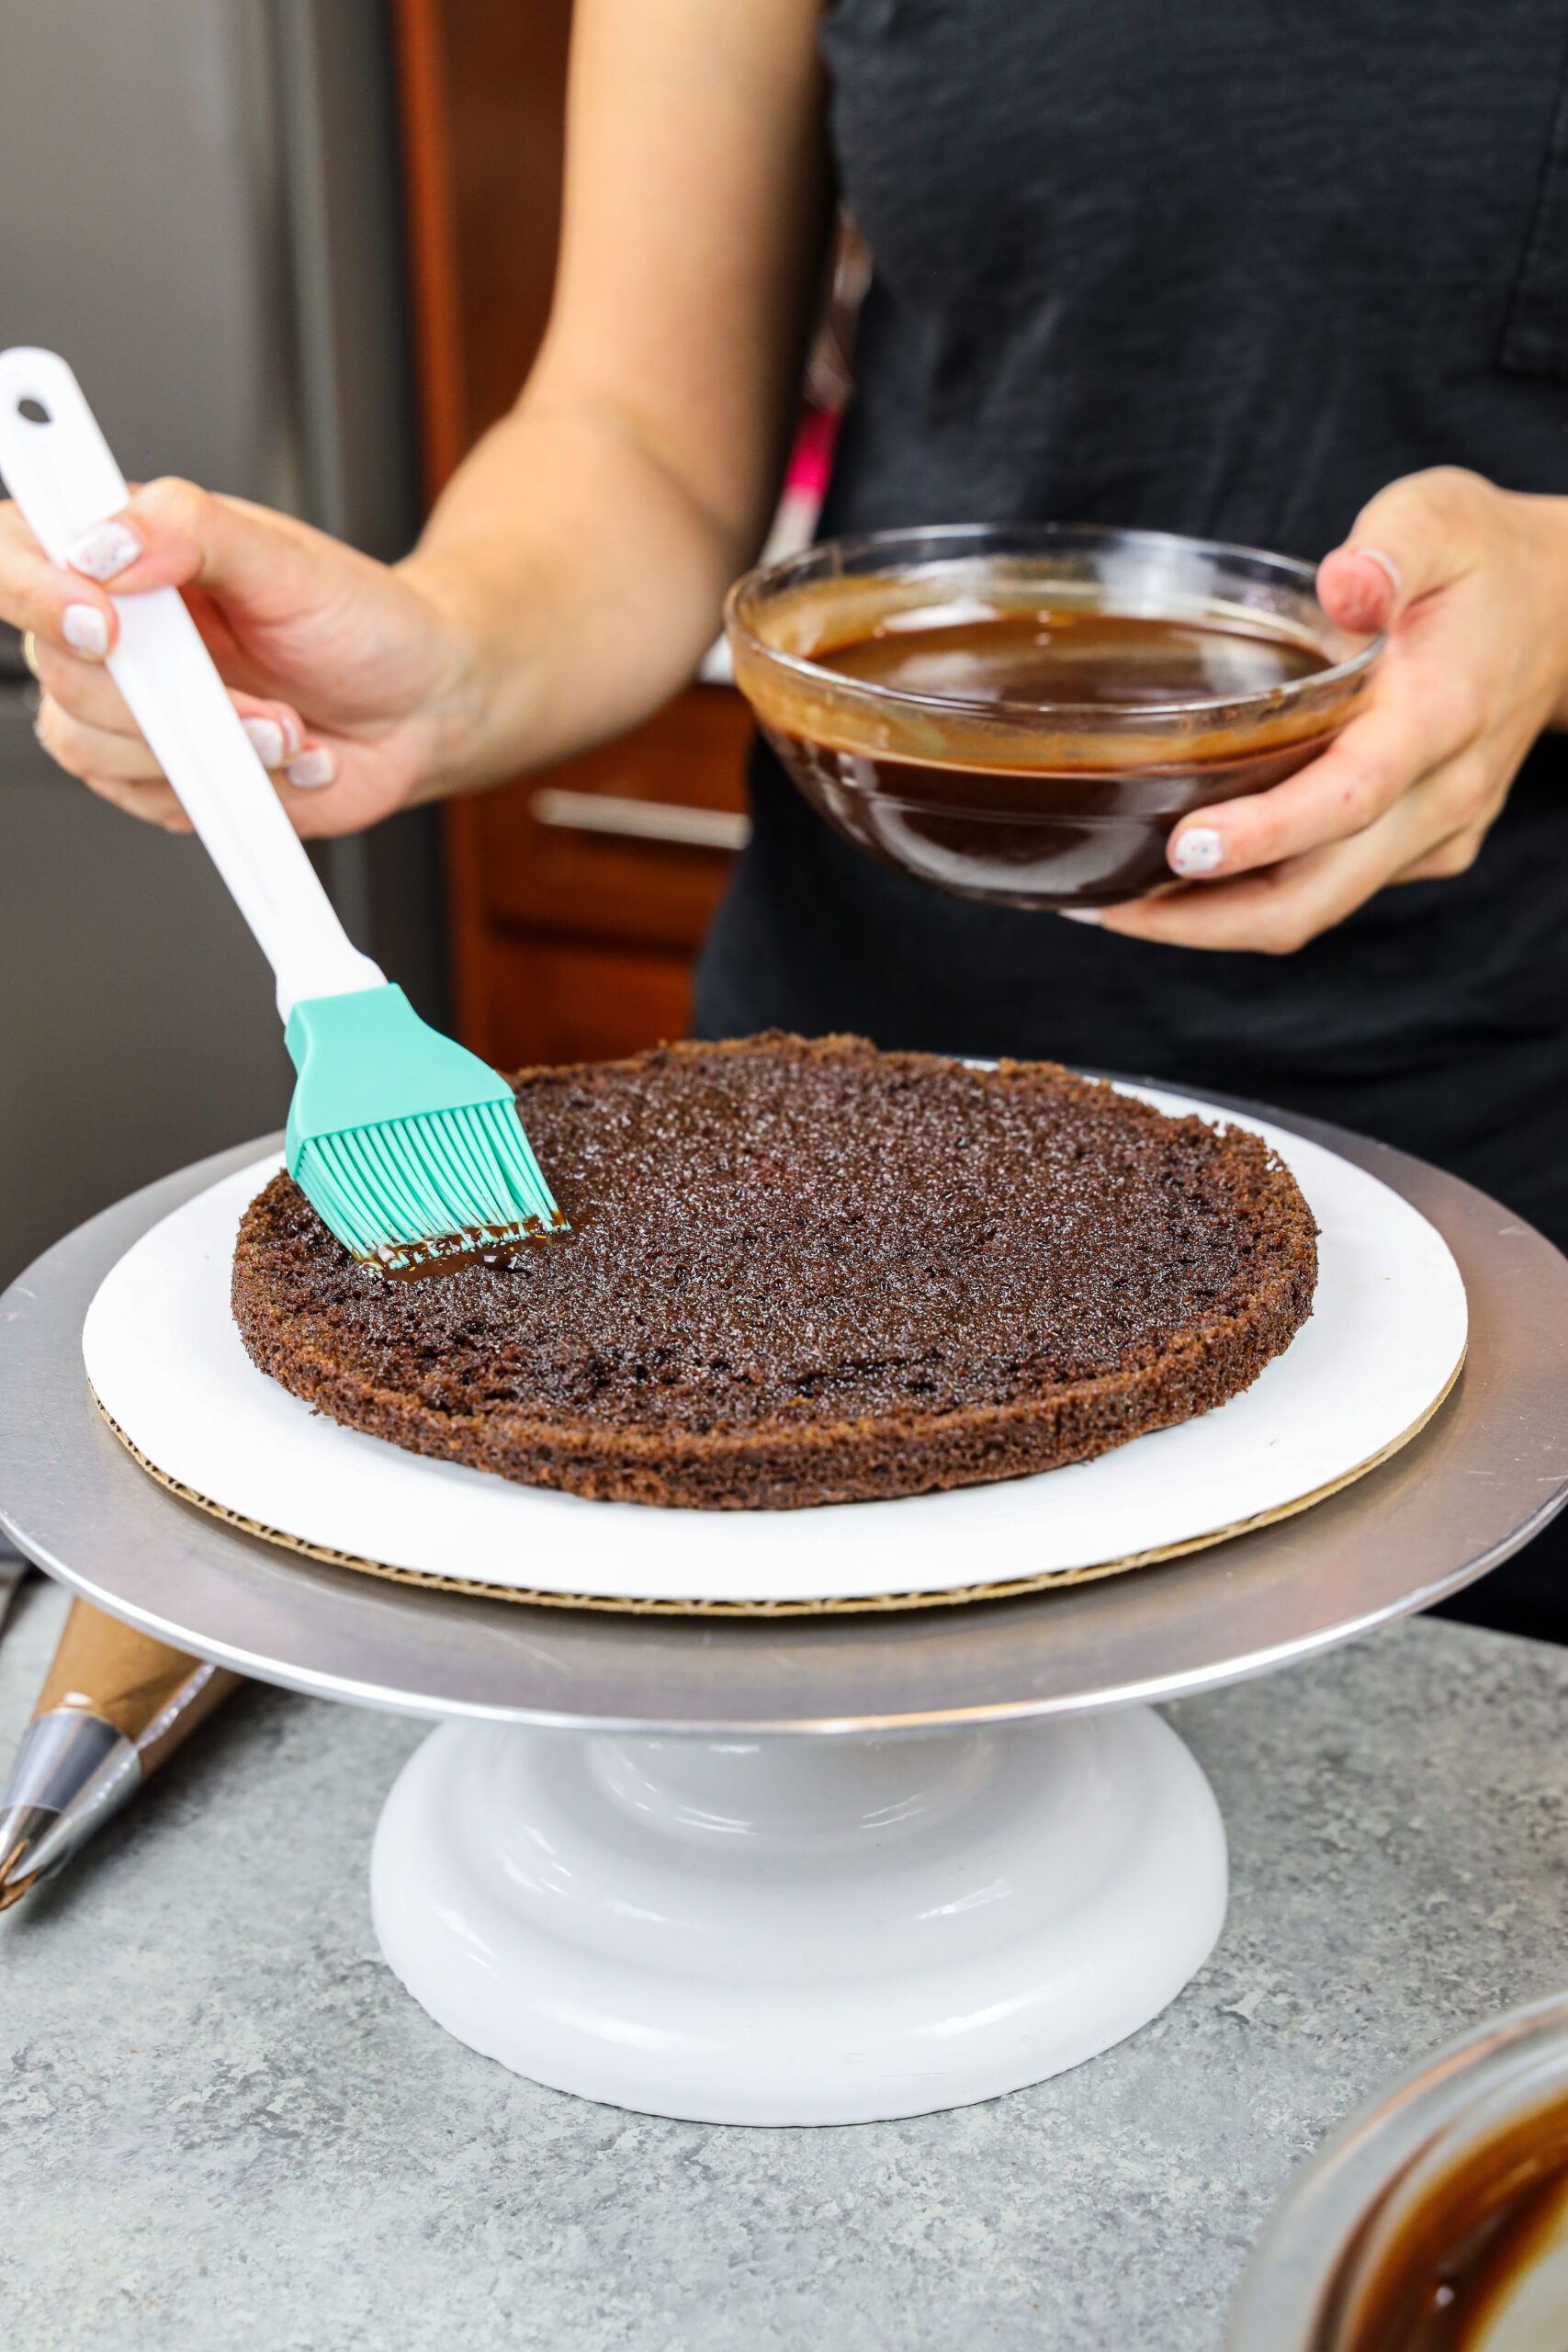 https://chelsweets.com/wp-content/uploads/2021/06/adding-chocolate-simple-syrup-onto-chocolate-cake-layer-vert-scaled.jpg